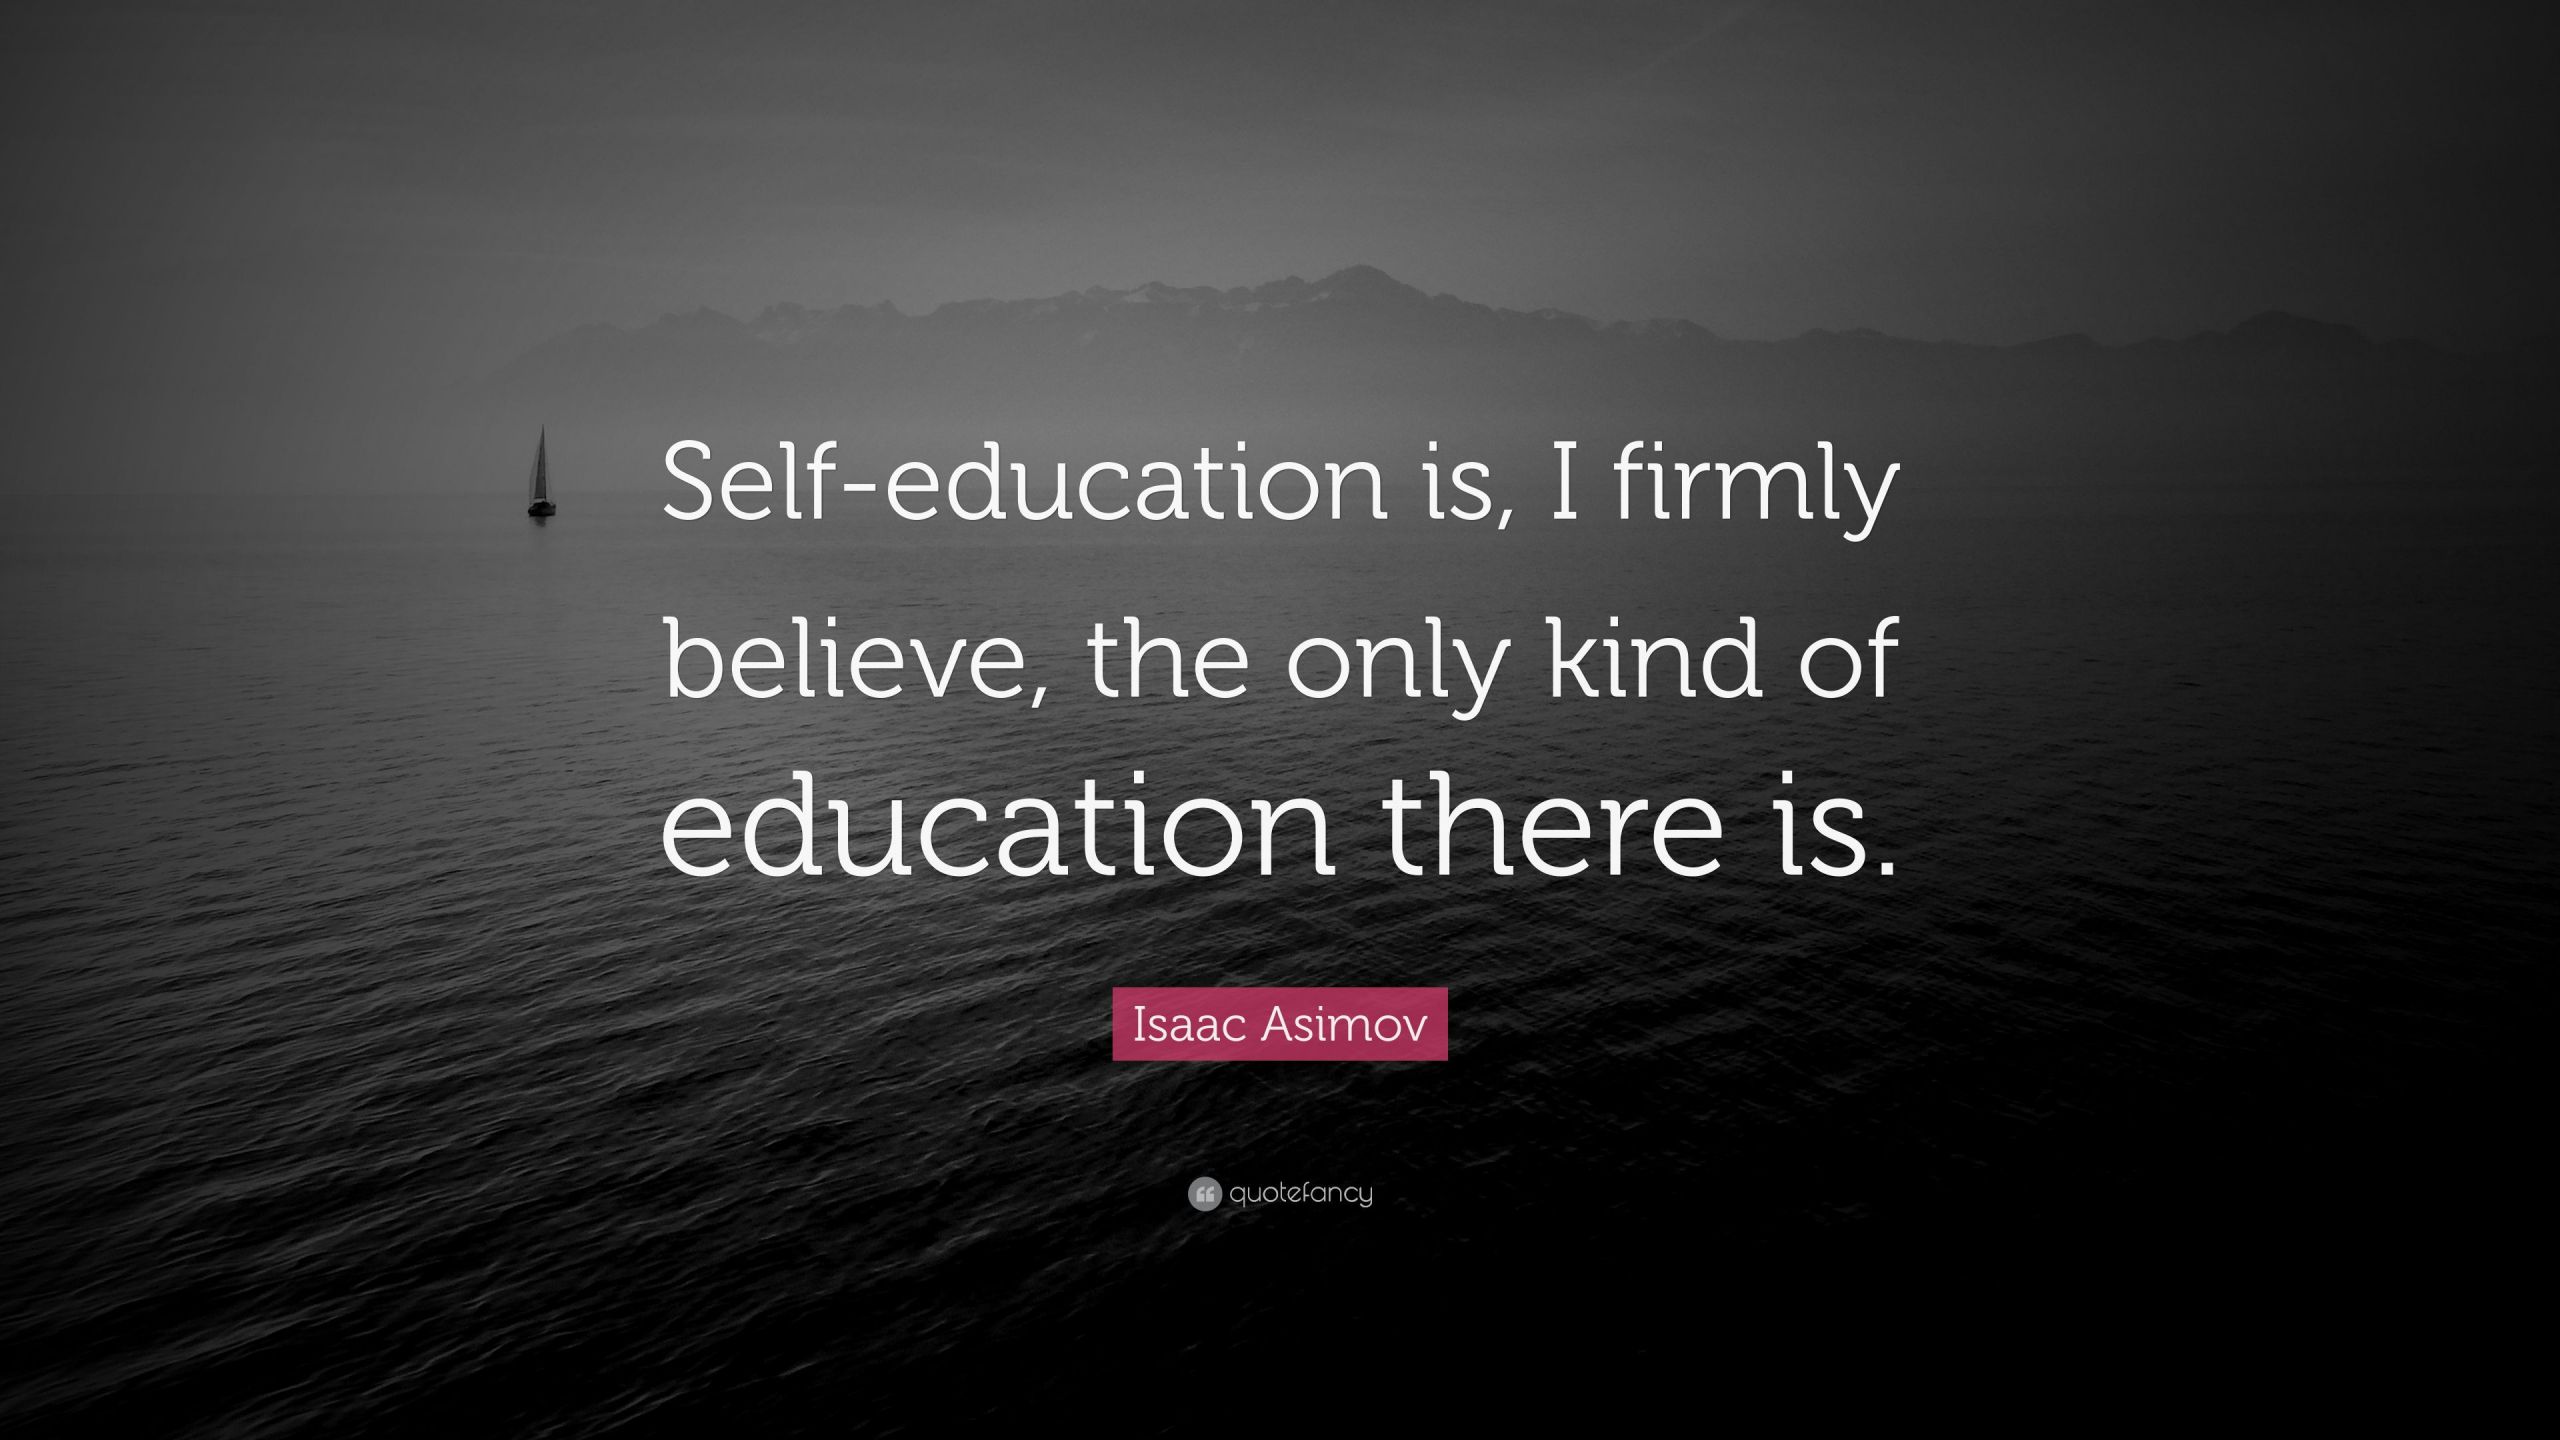 Self Education Quote
 Isaac Asimov Quote “Self education is I firmly believe